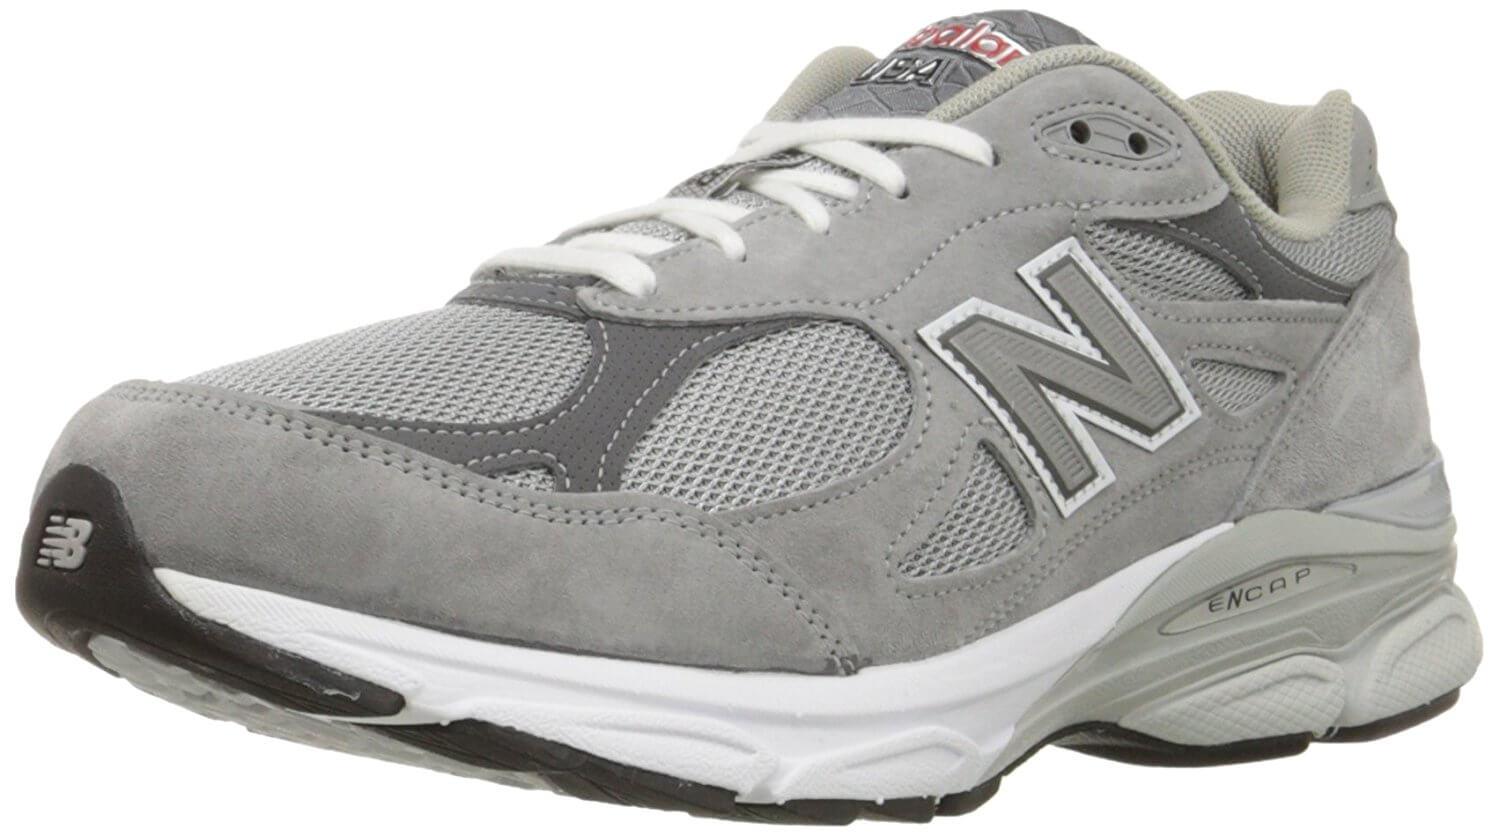 A three quarter perspective of the New Balance 990v3 running shoe